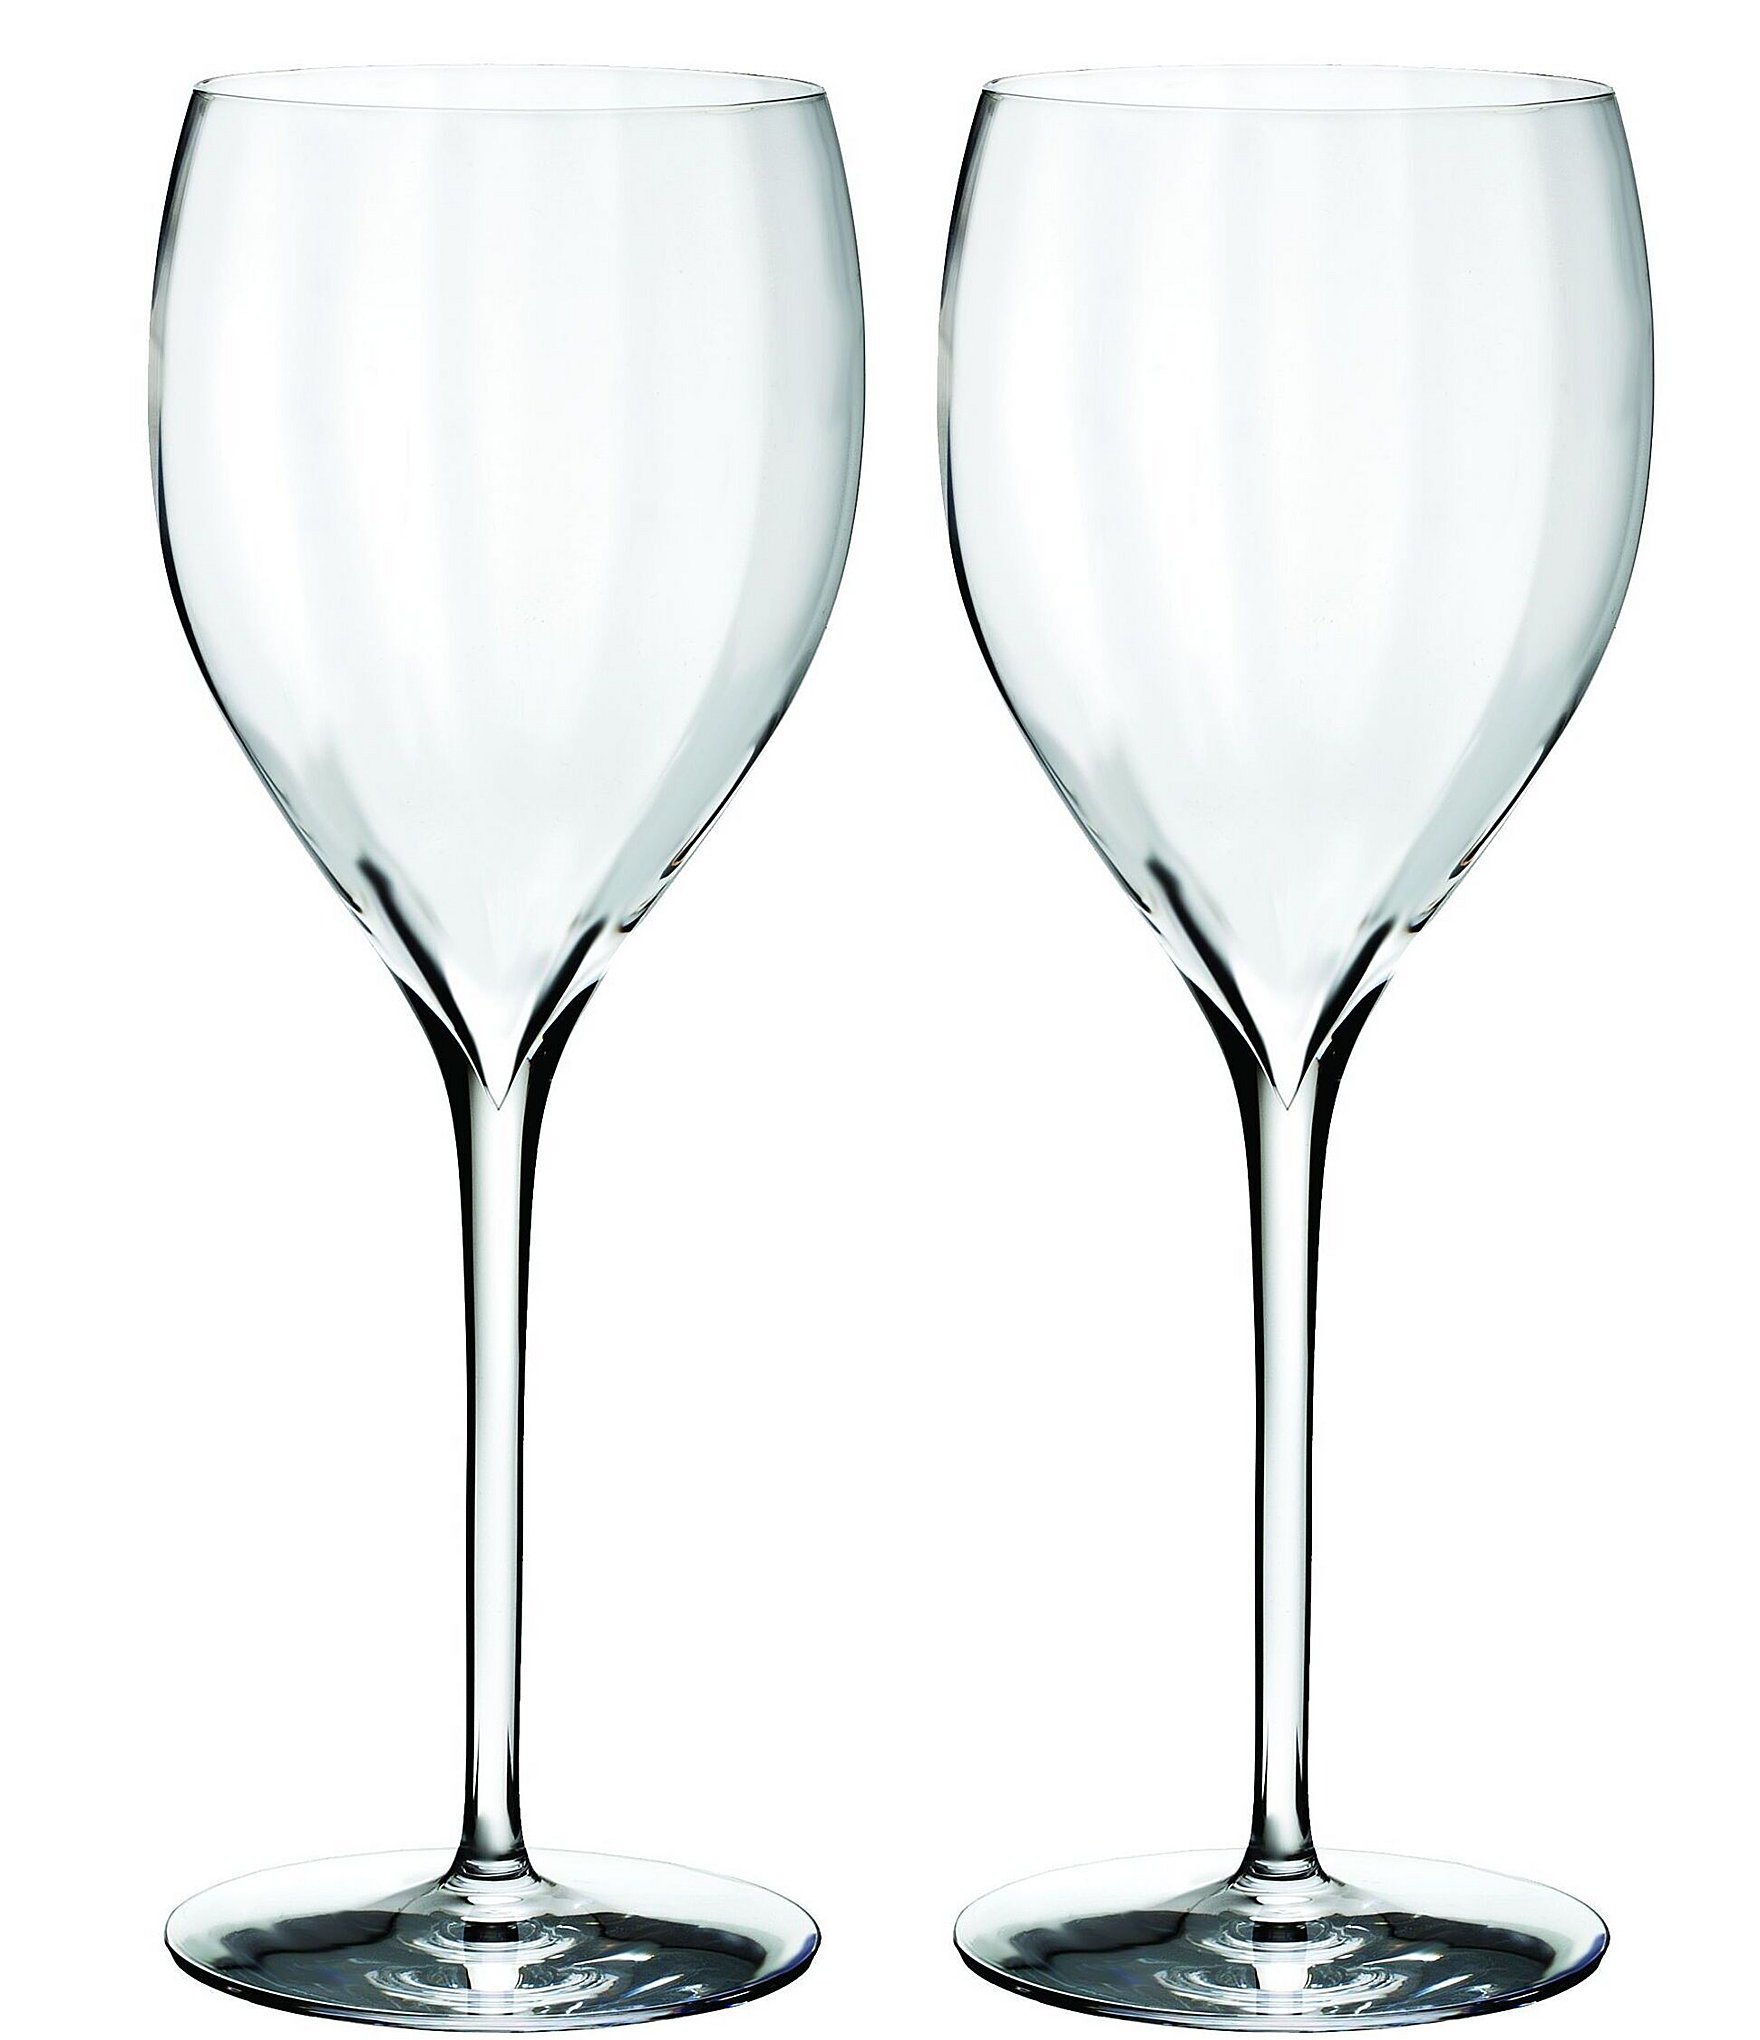 Waterford Crystal, Astor Set of 2, (14 oz) Stemless Wine Glasses on sale at   - 477-214